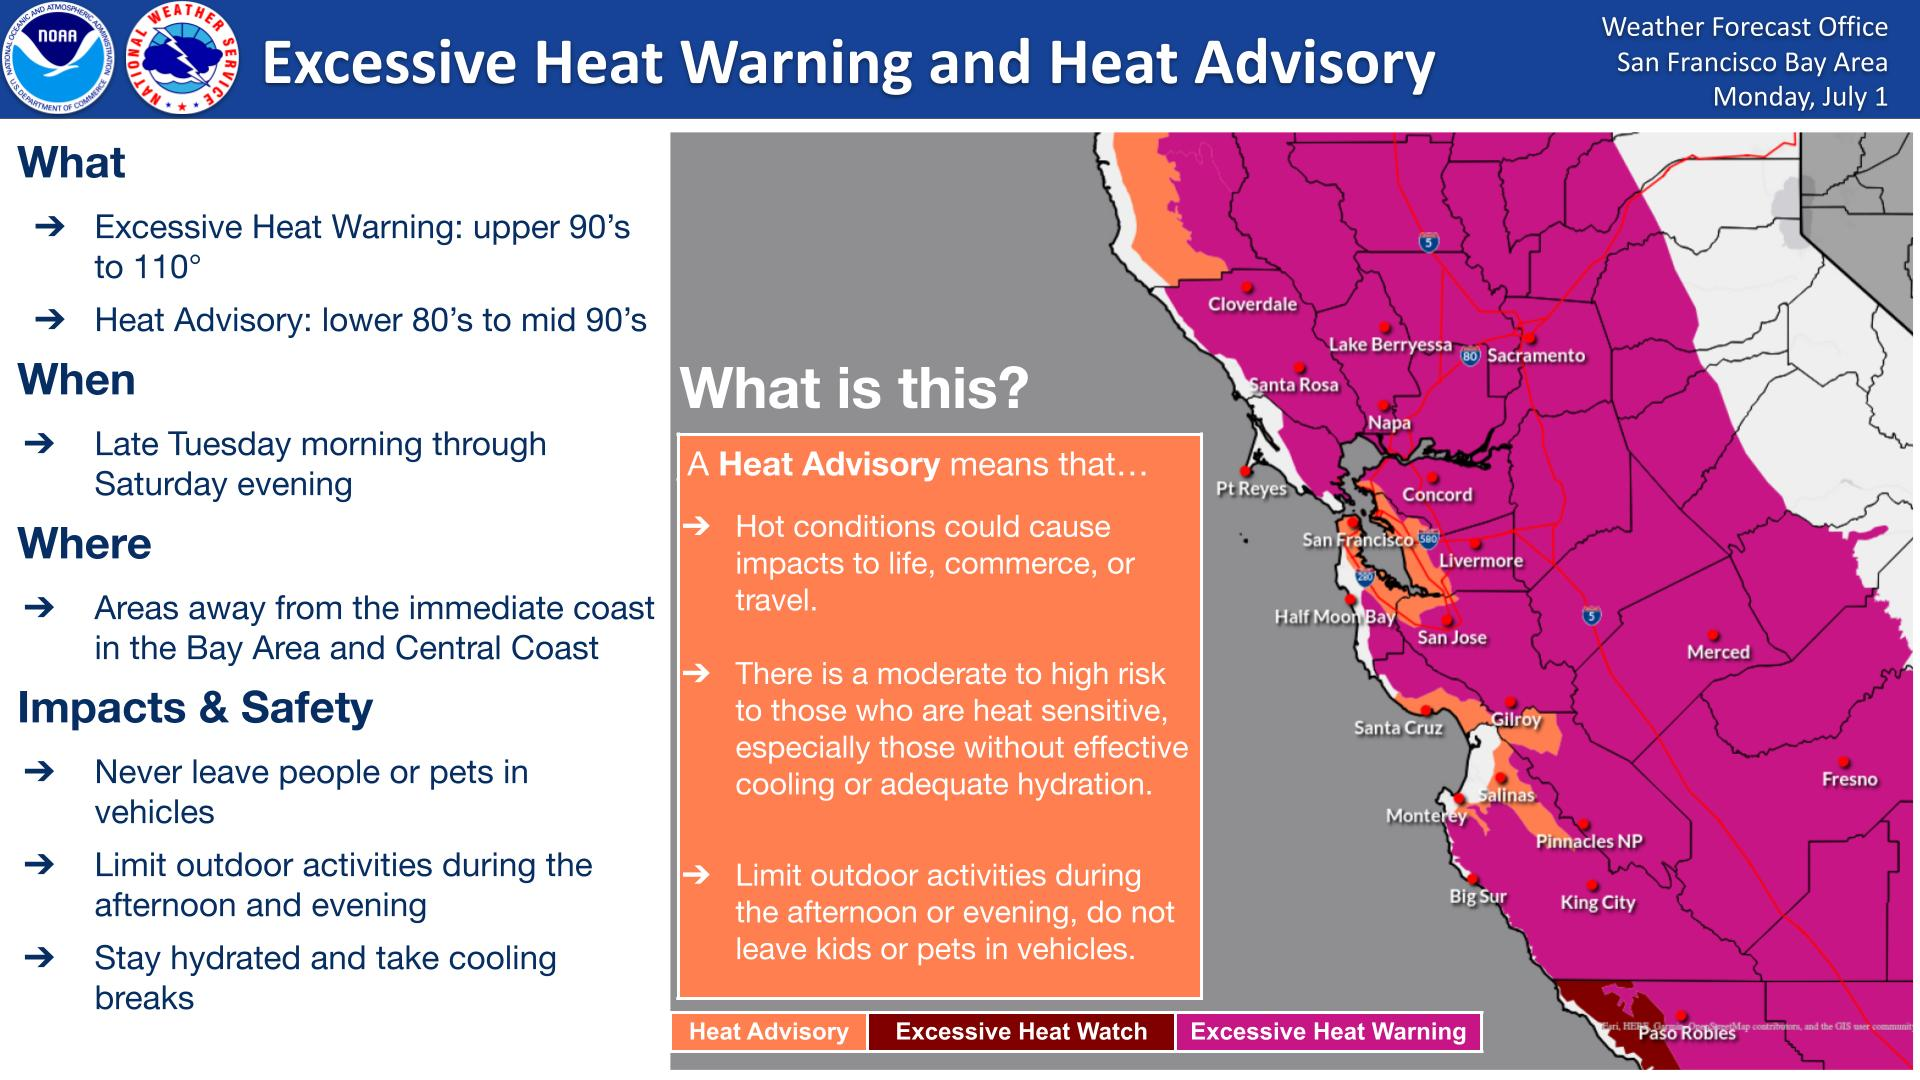 Excessive Heat Warning for July 2 - 10: Cooling & Safety Resources